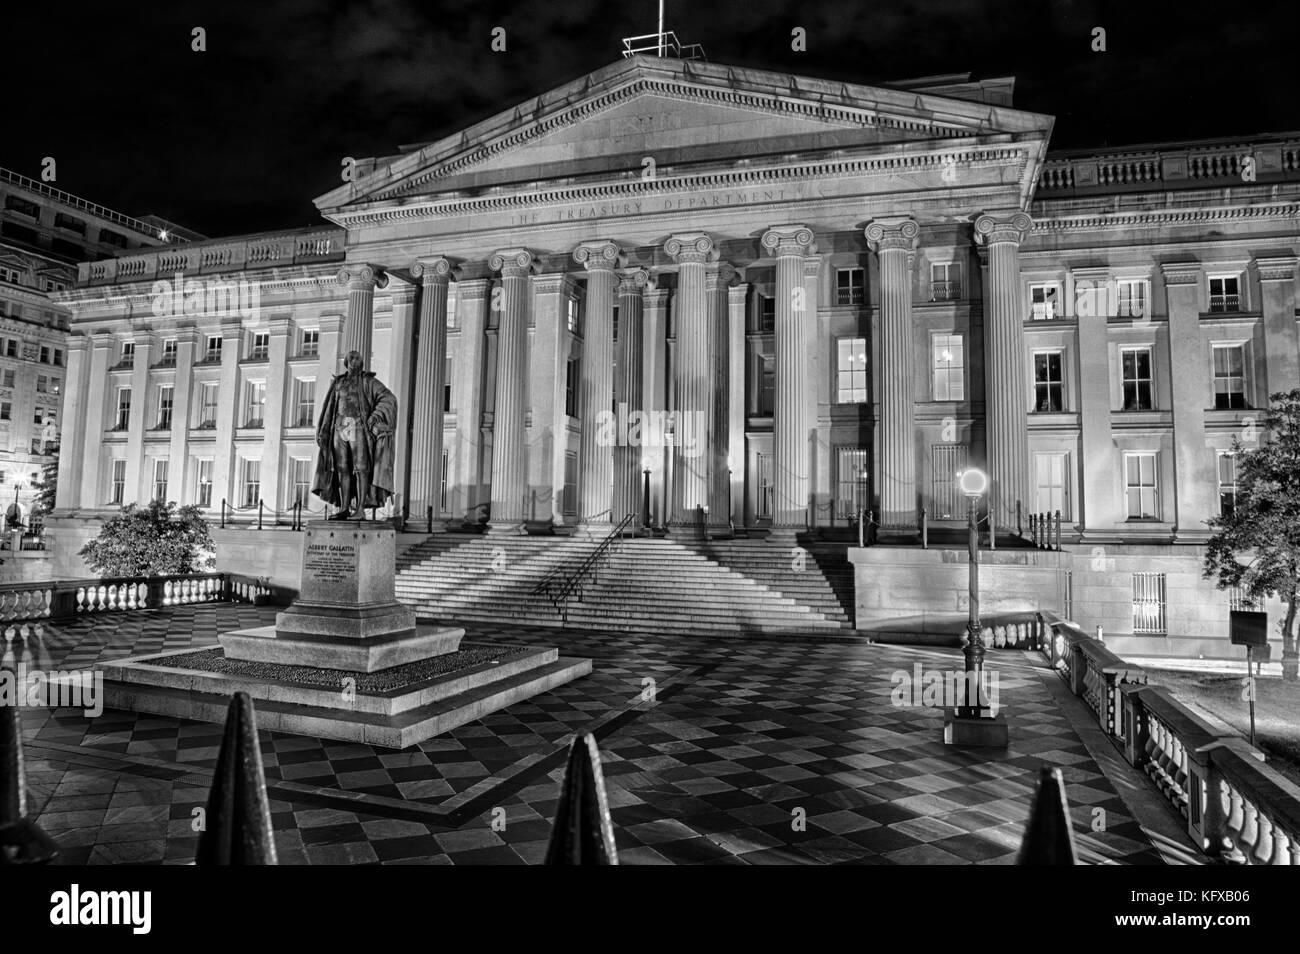 September 12, 2017, Washington, DC, USA: The US Treasury  building lit up at night with the statue of Gallatin prominent out front. Stock Photo